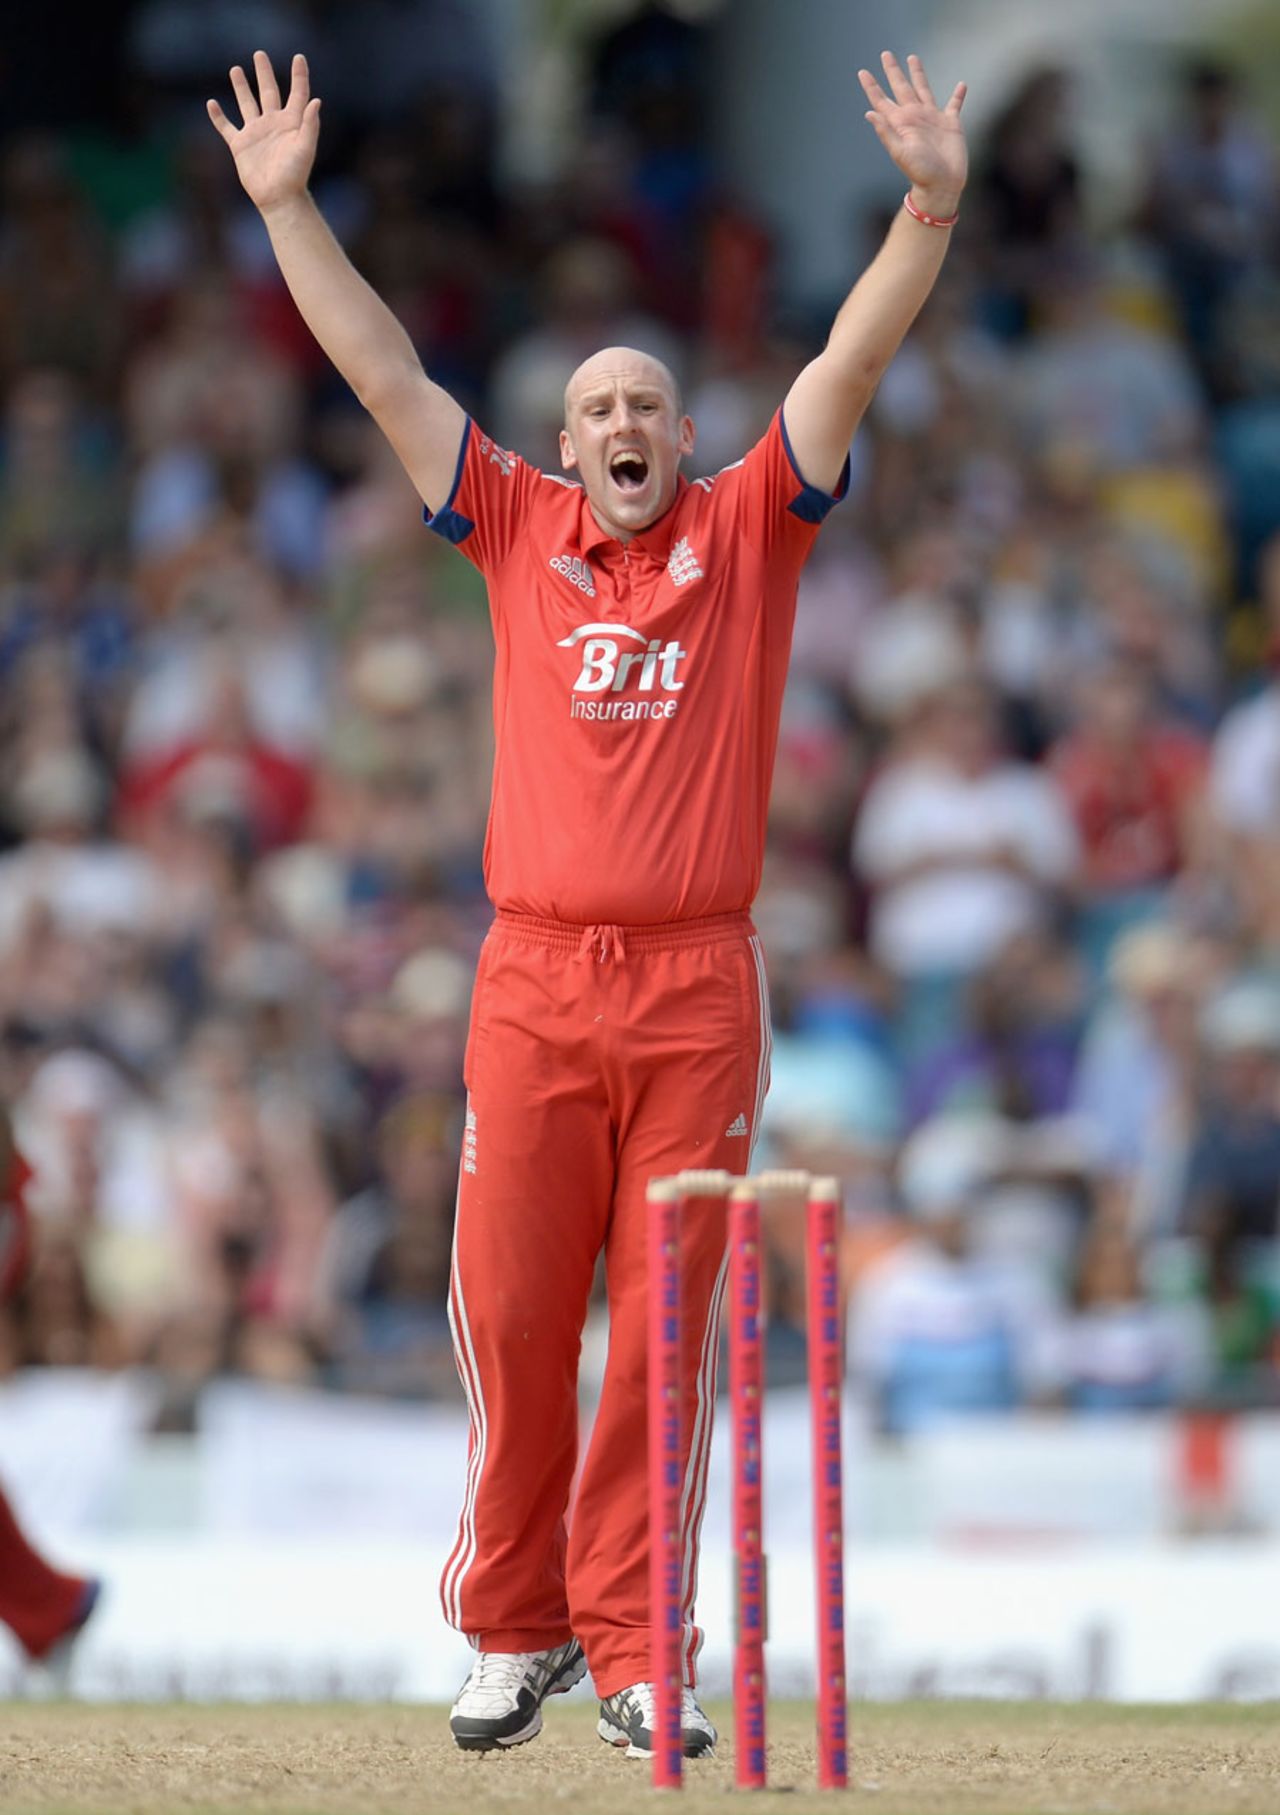 James Tredwell won an lbw decision against Chris Gayle, West Indies v England, 1st T20, Barbados, March 9, 2014